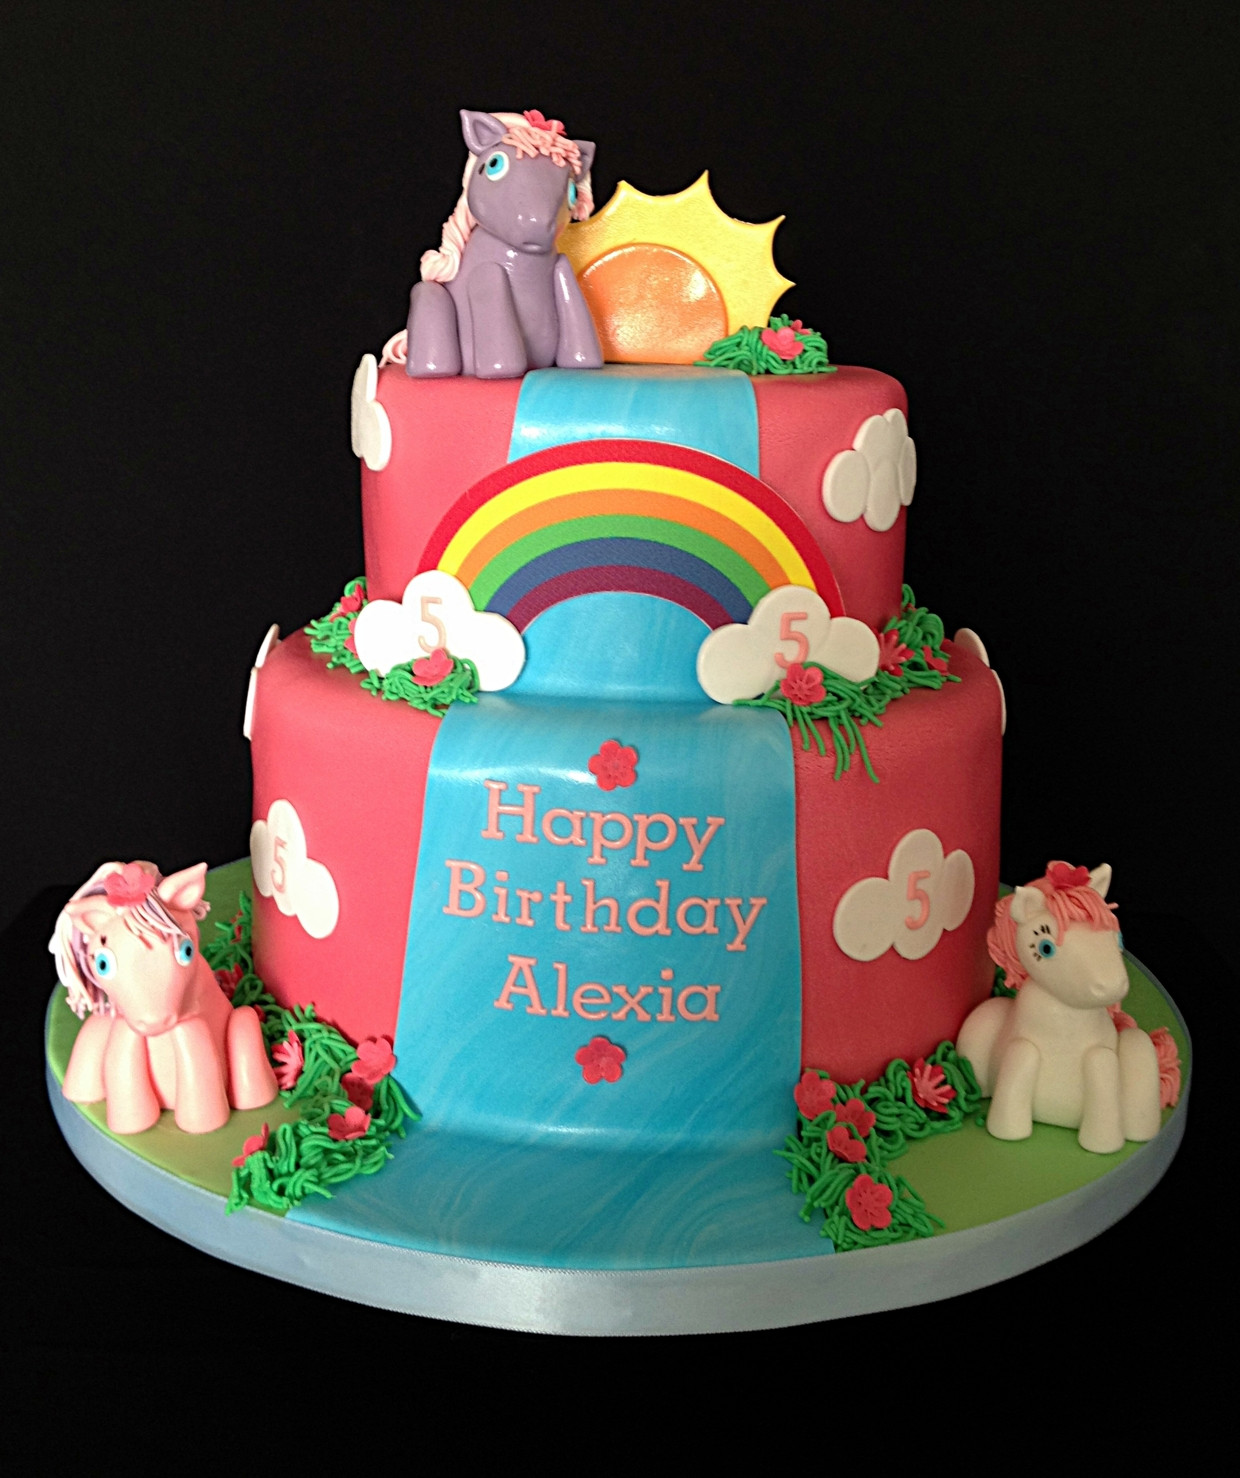 Pictures Of A Birthday Cake
 My Little Pony Cakes – Decoration Ideas